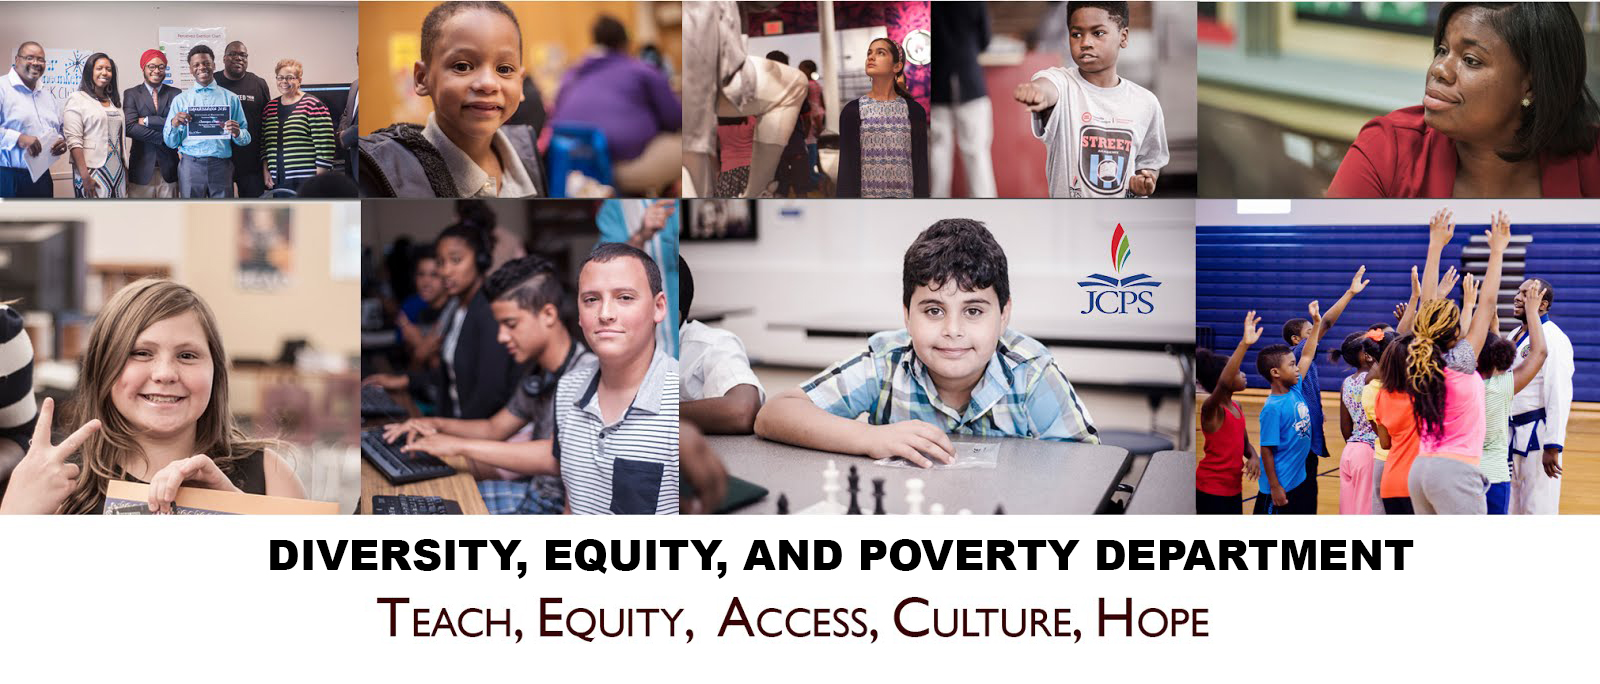 JCPS Diversity, Equity, and Poverty Programs